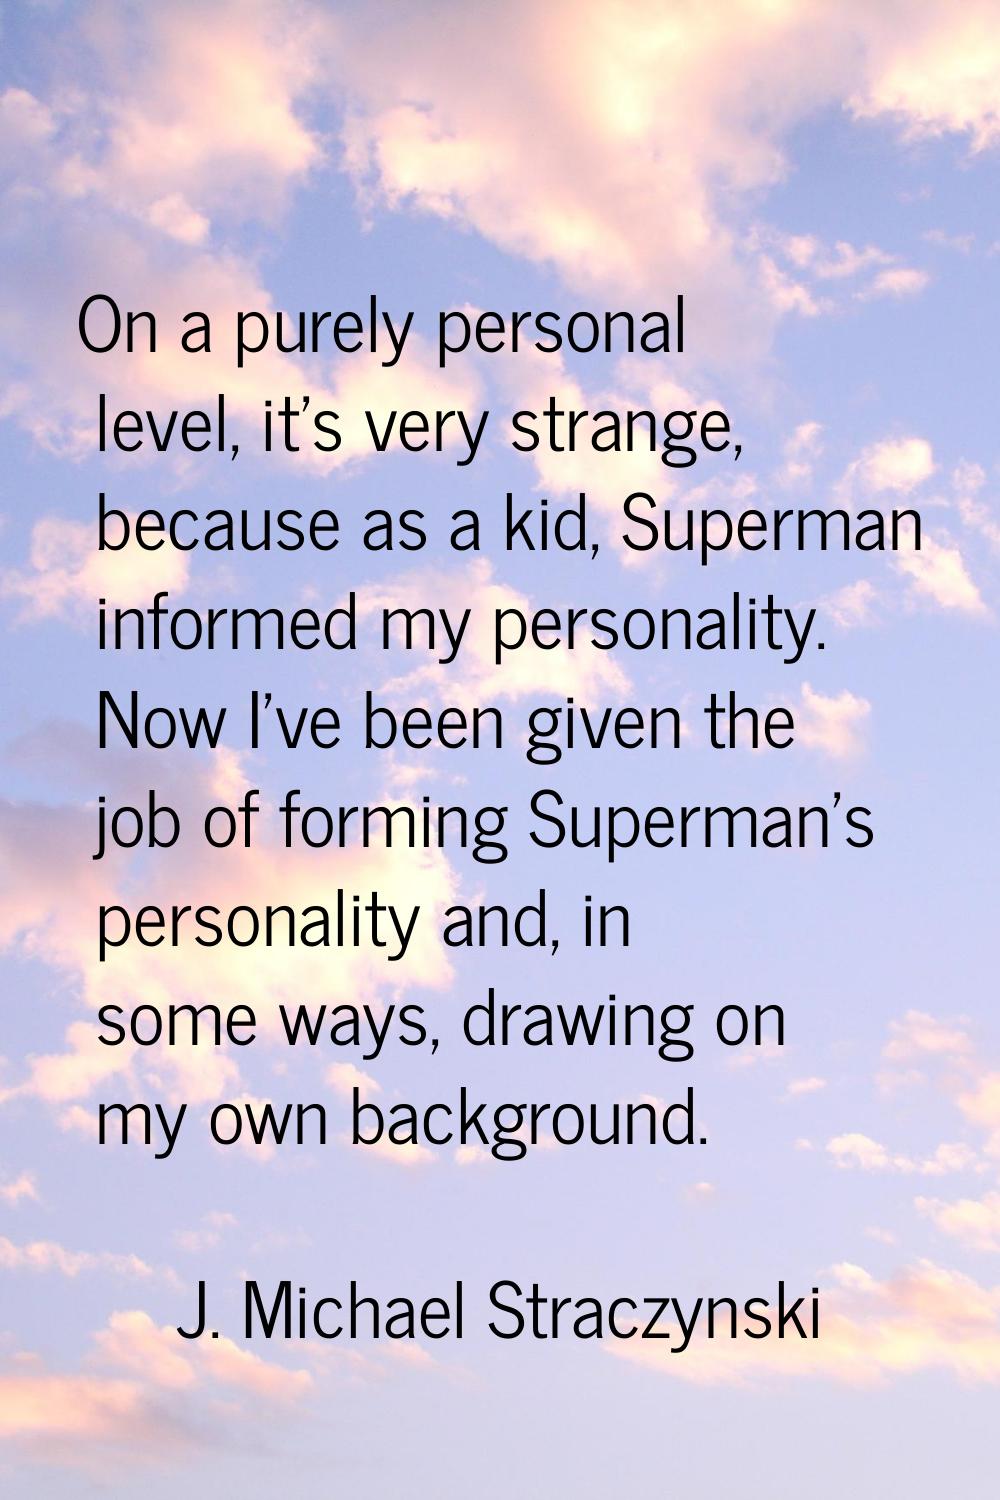 On a purely personal level, it's very strange, because as a kid, Superman informed my personality. 